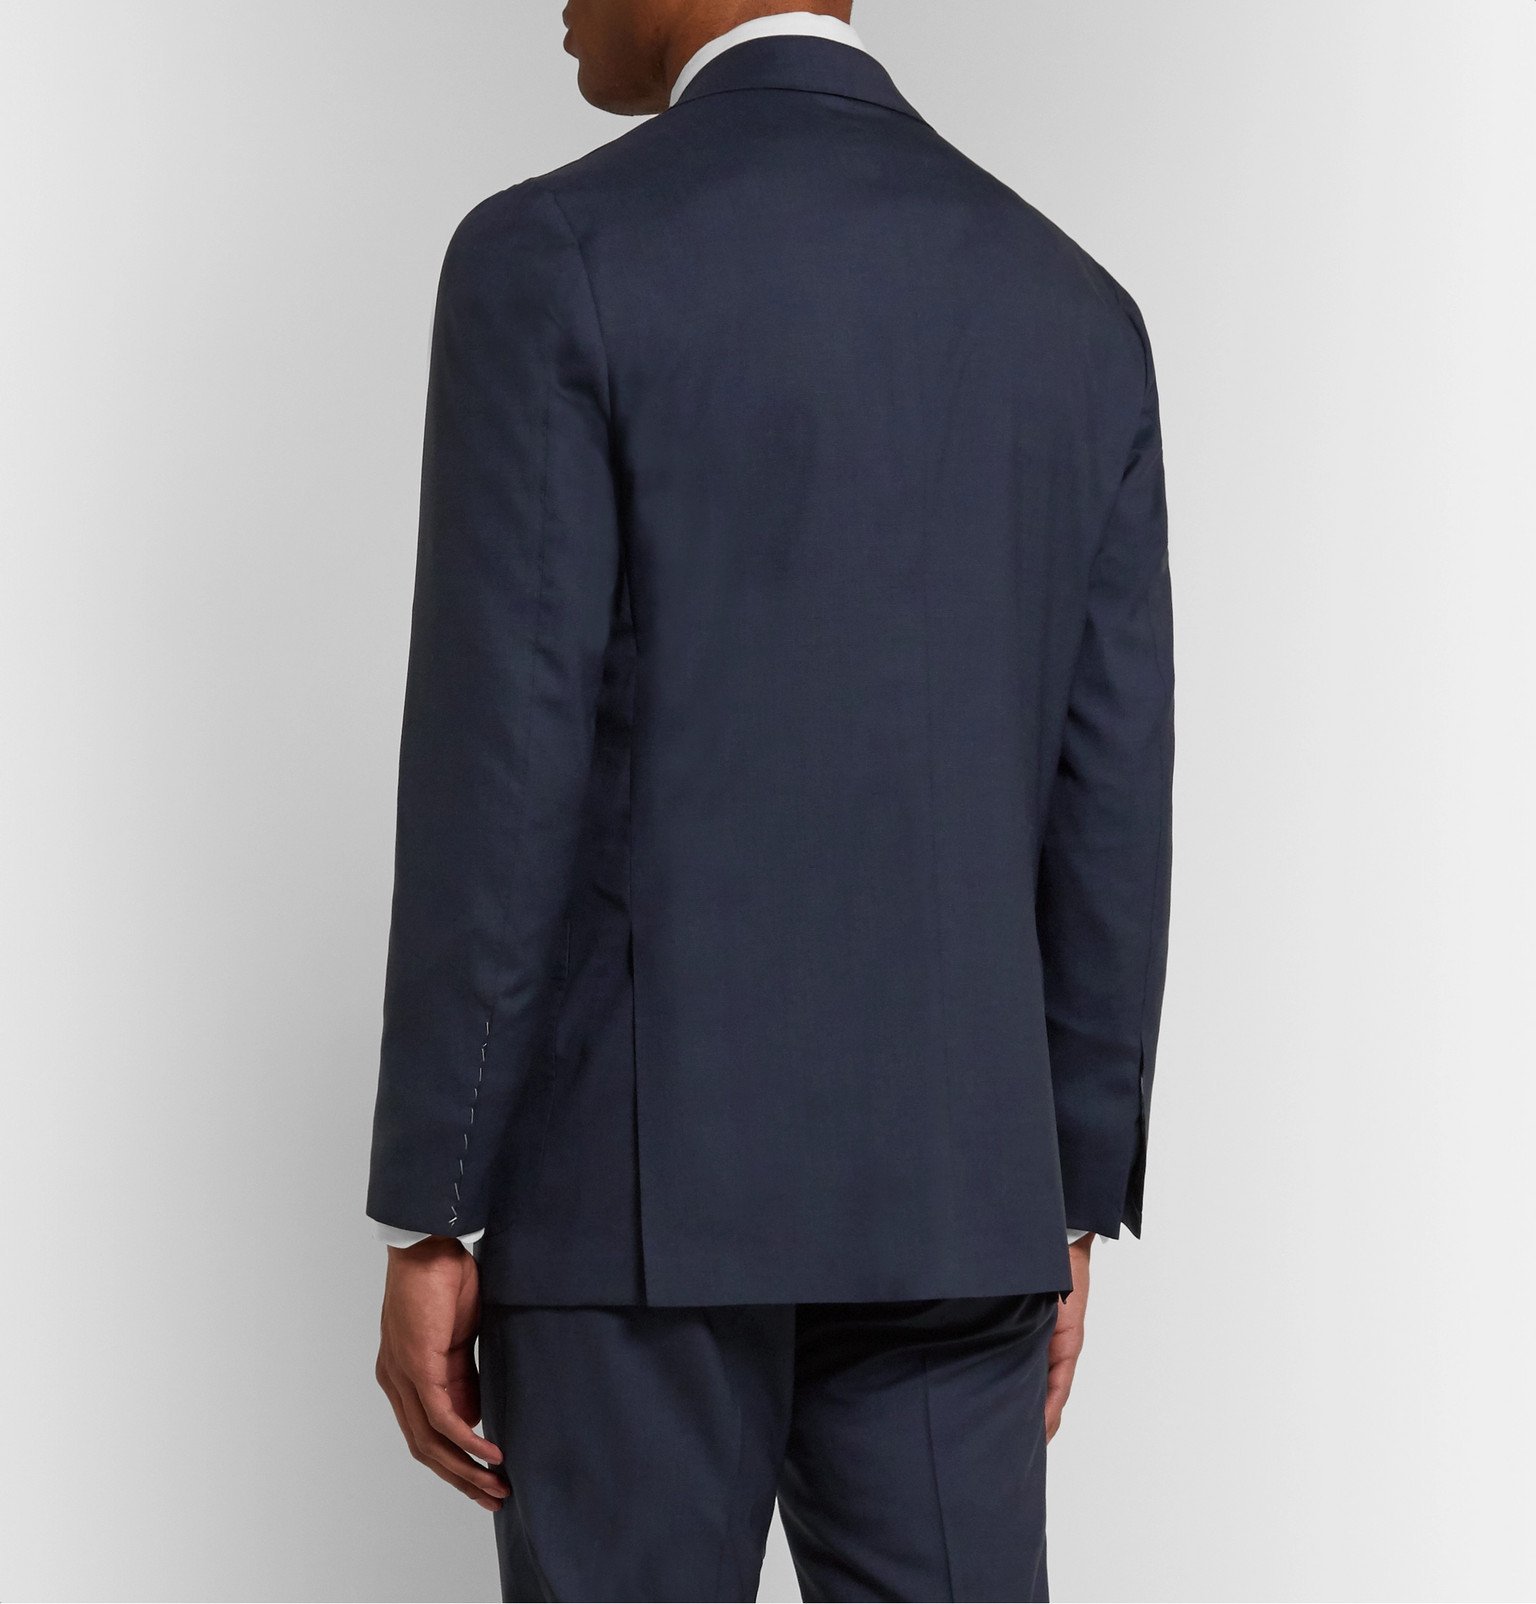 Kiton - Slim-Fit Unstructured Puppytooth Cashmere Suit Jacket - Blue Kiton